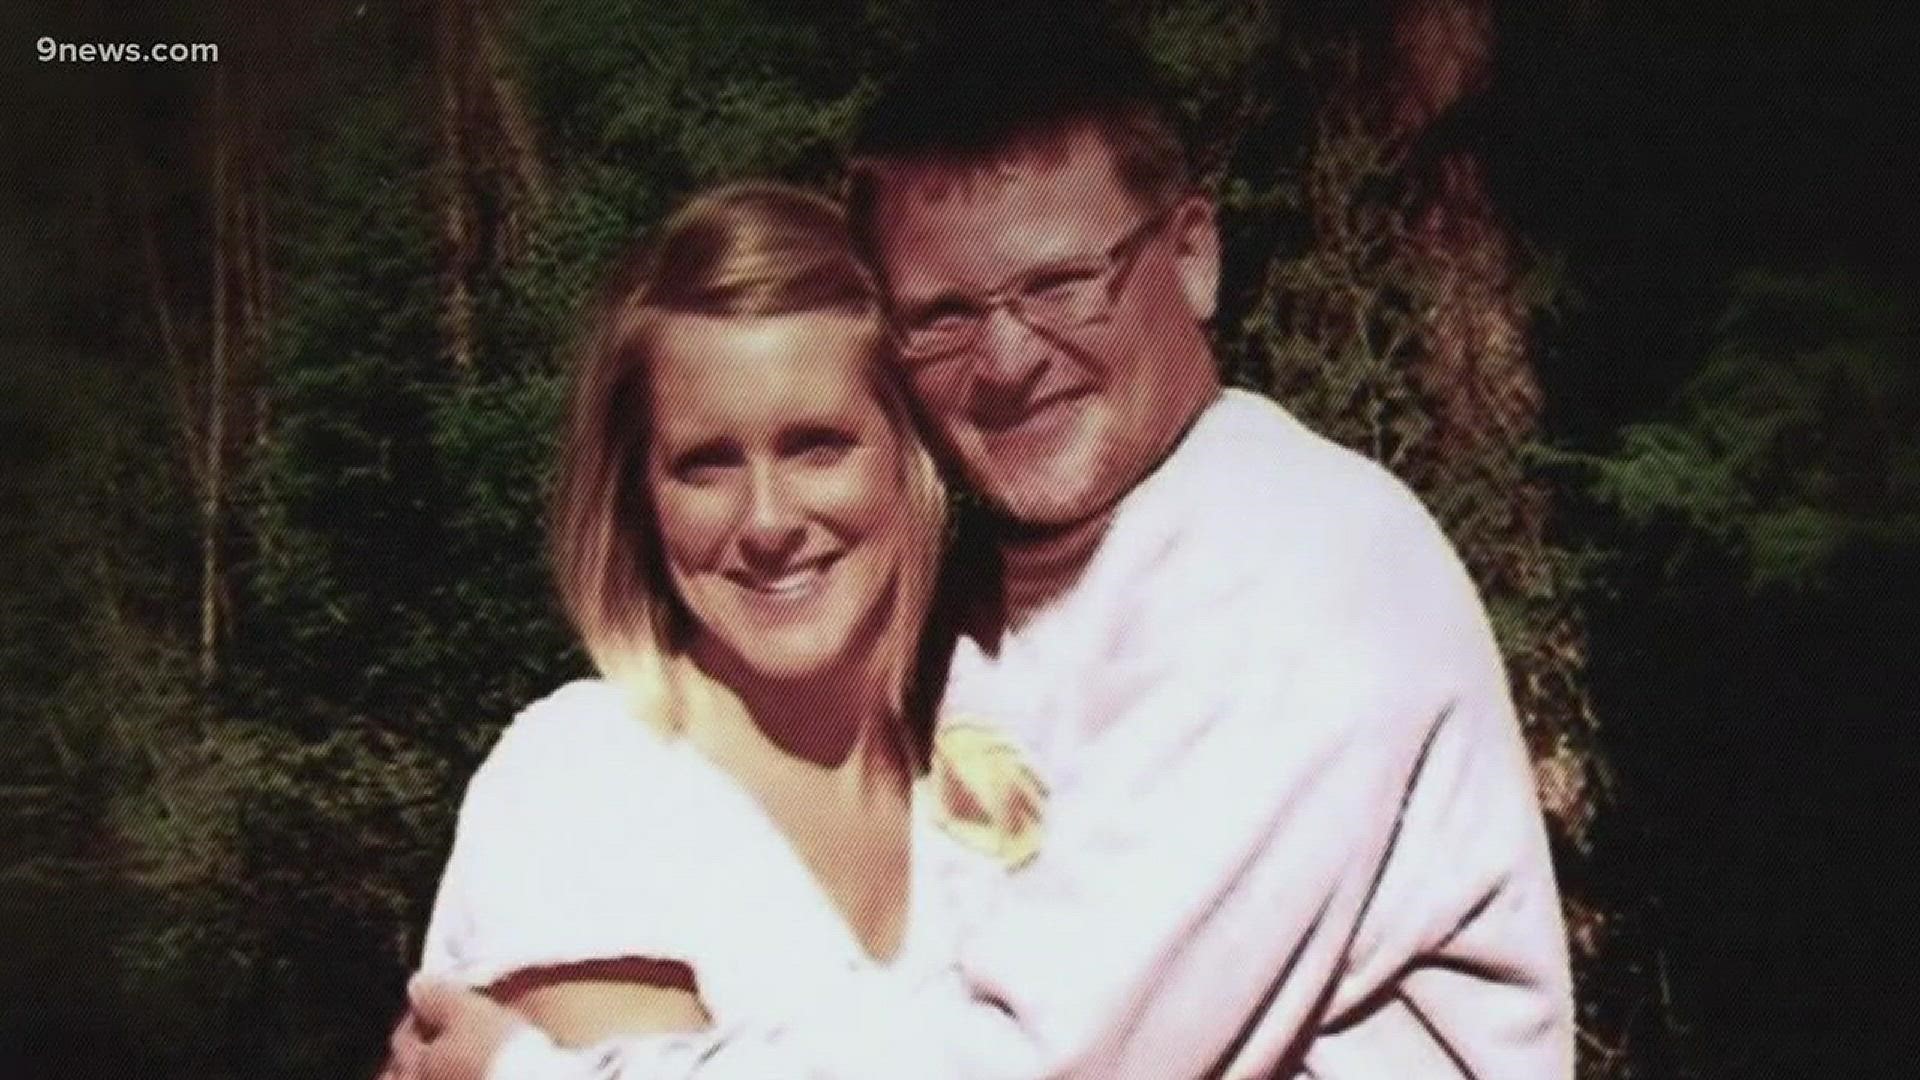 For the first time, a convicted killer is speaking from prison about a Colorado murder that rocked the nation. Richard Kirk shot and killed his wife Kris in 2014 while she was dialing 911 for help.